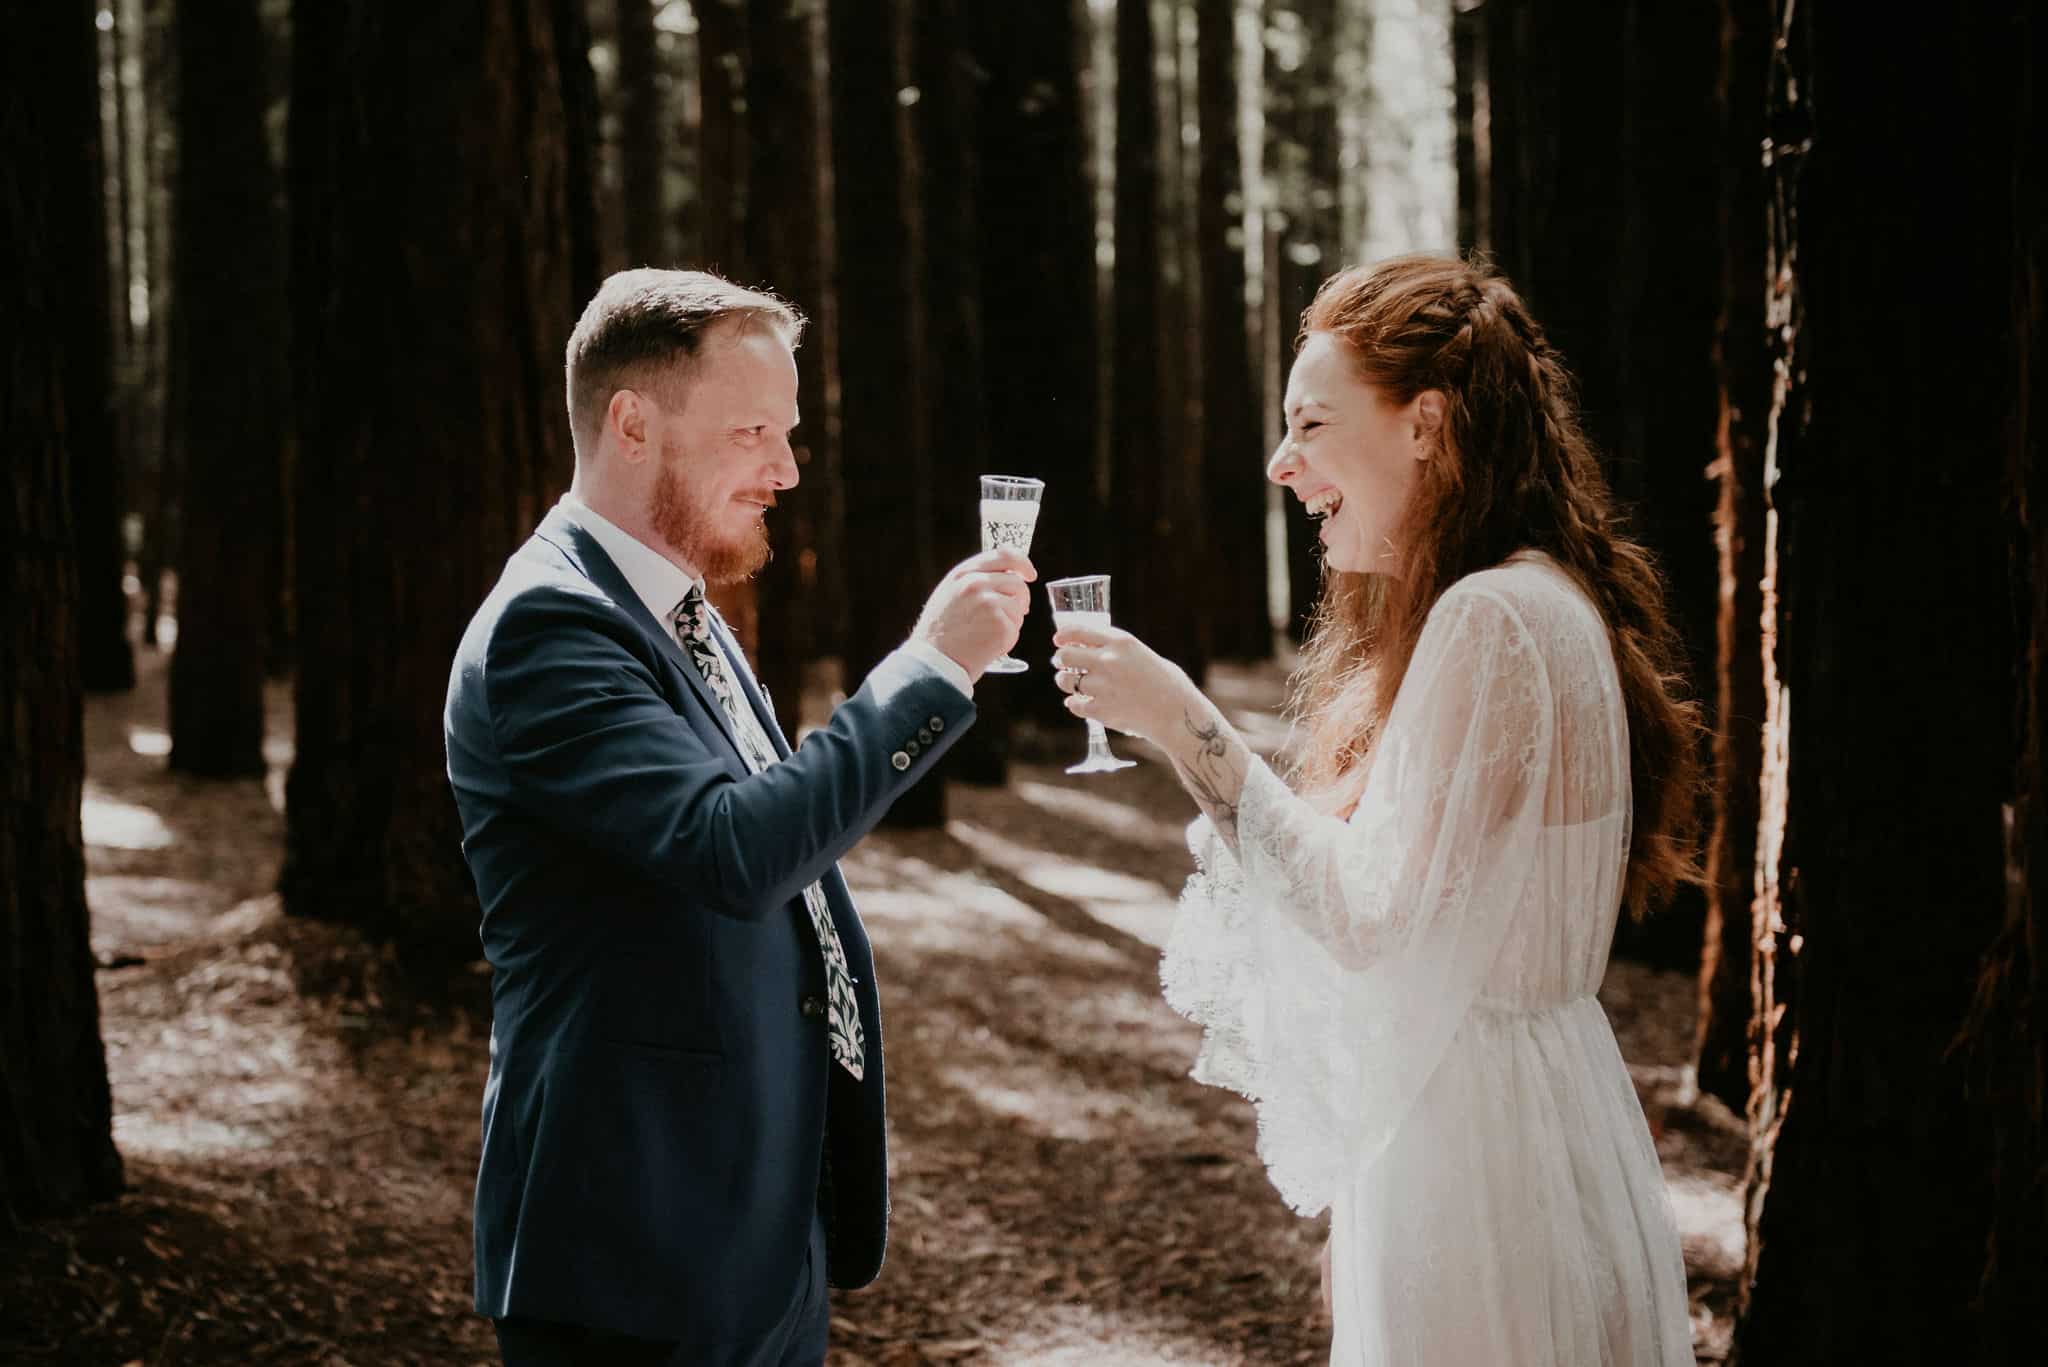 Couple toast to their marriage amongst the trees in the dappled light Let's Elope Melbourne Celebrant Photographer Elopement Package Victoria Sarah Matler Photography Warburton Redwood Forest Yarra Valley intimate wedding Ceremony